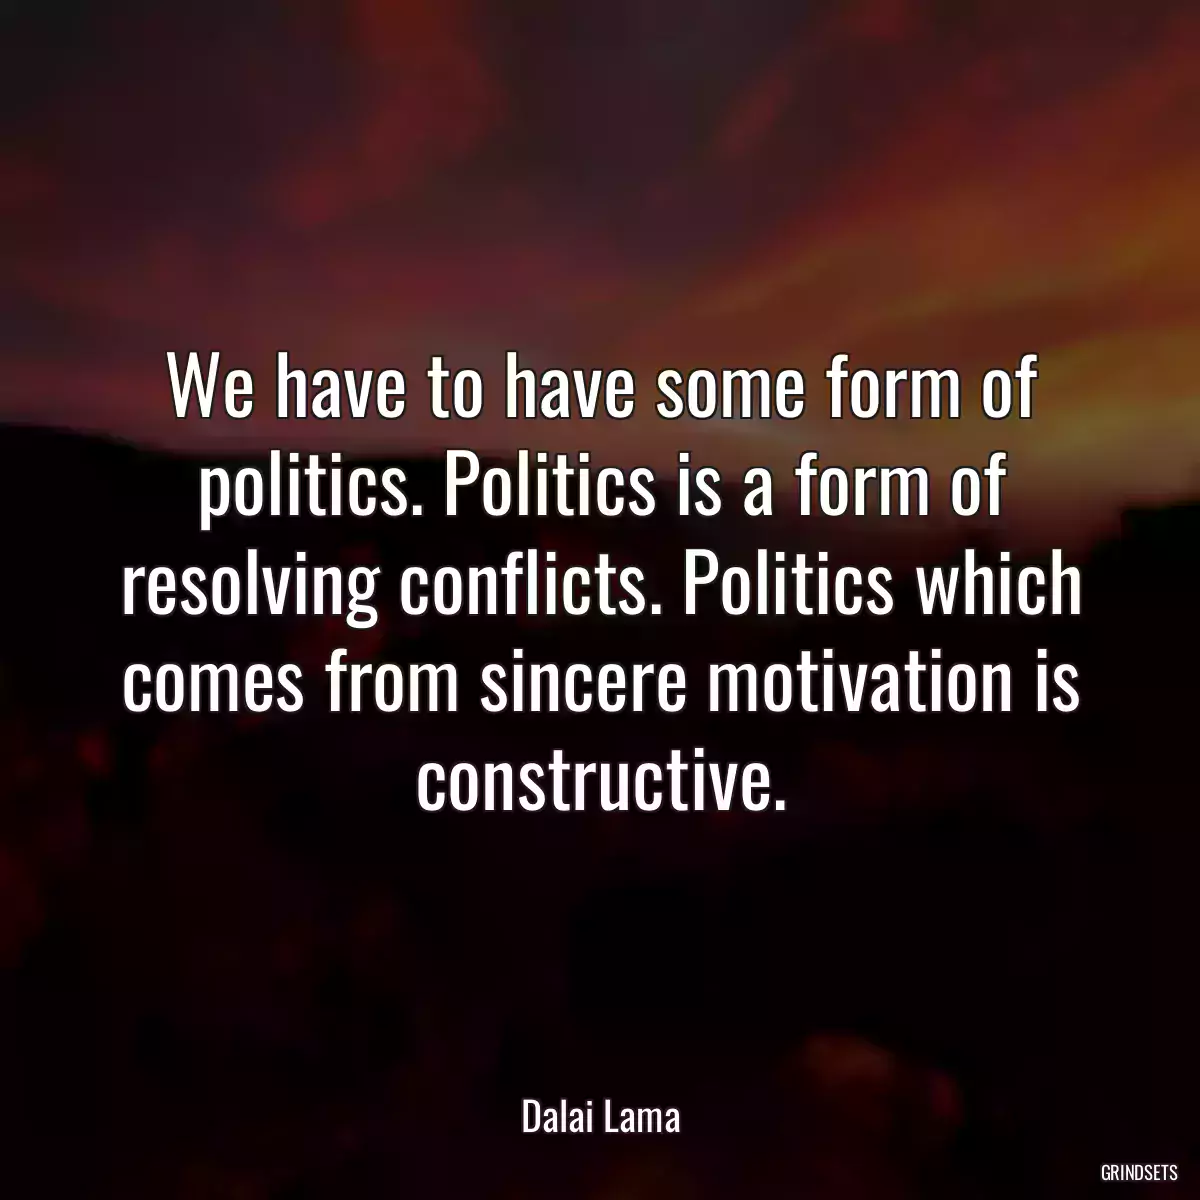 We have to have some form of politics. Politics is a form of resolving conflicts. Politics which comes from sincere motivation is constructive.